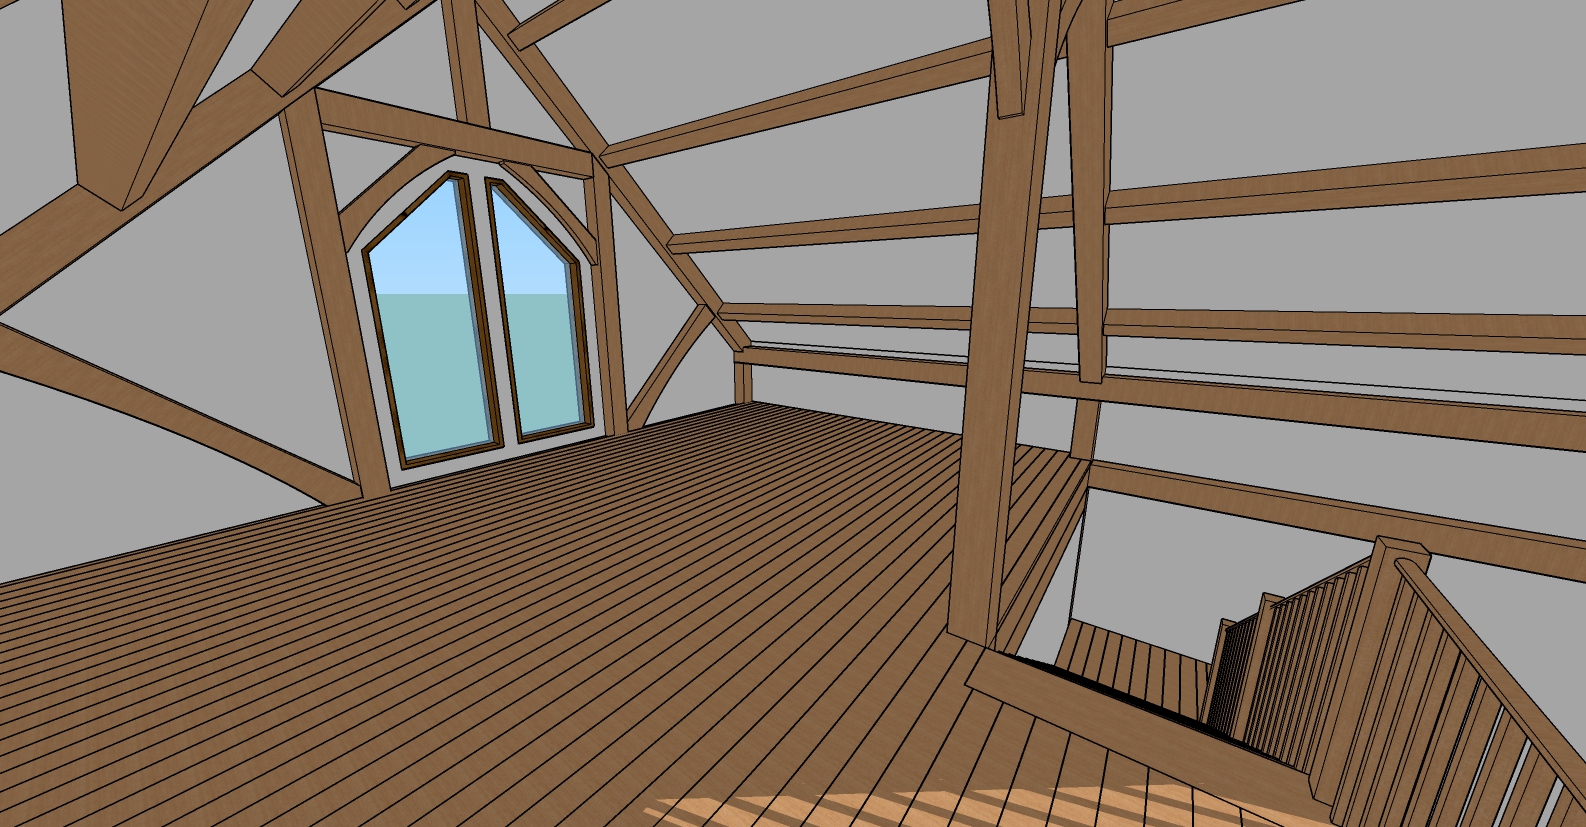 A 3 d image of the interior of a house.